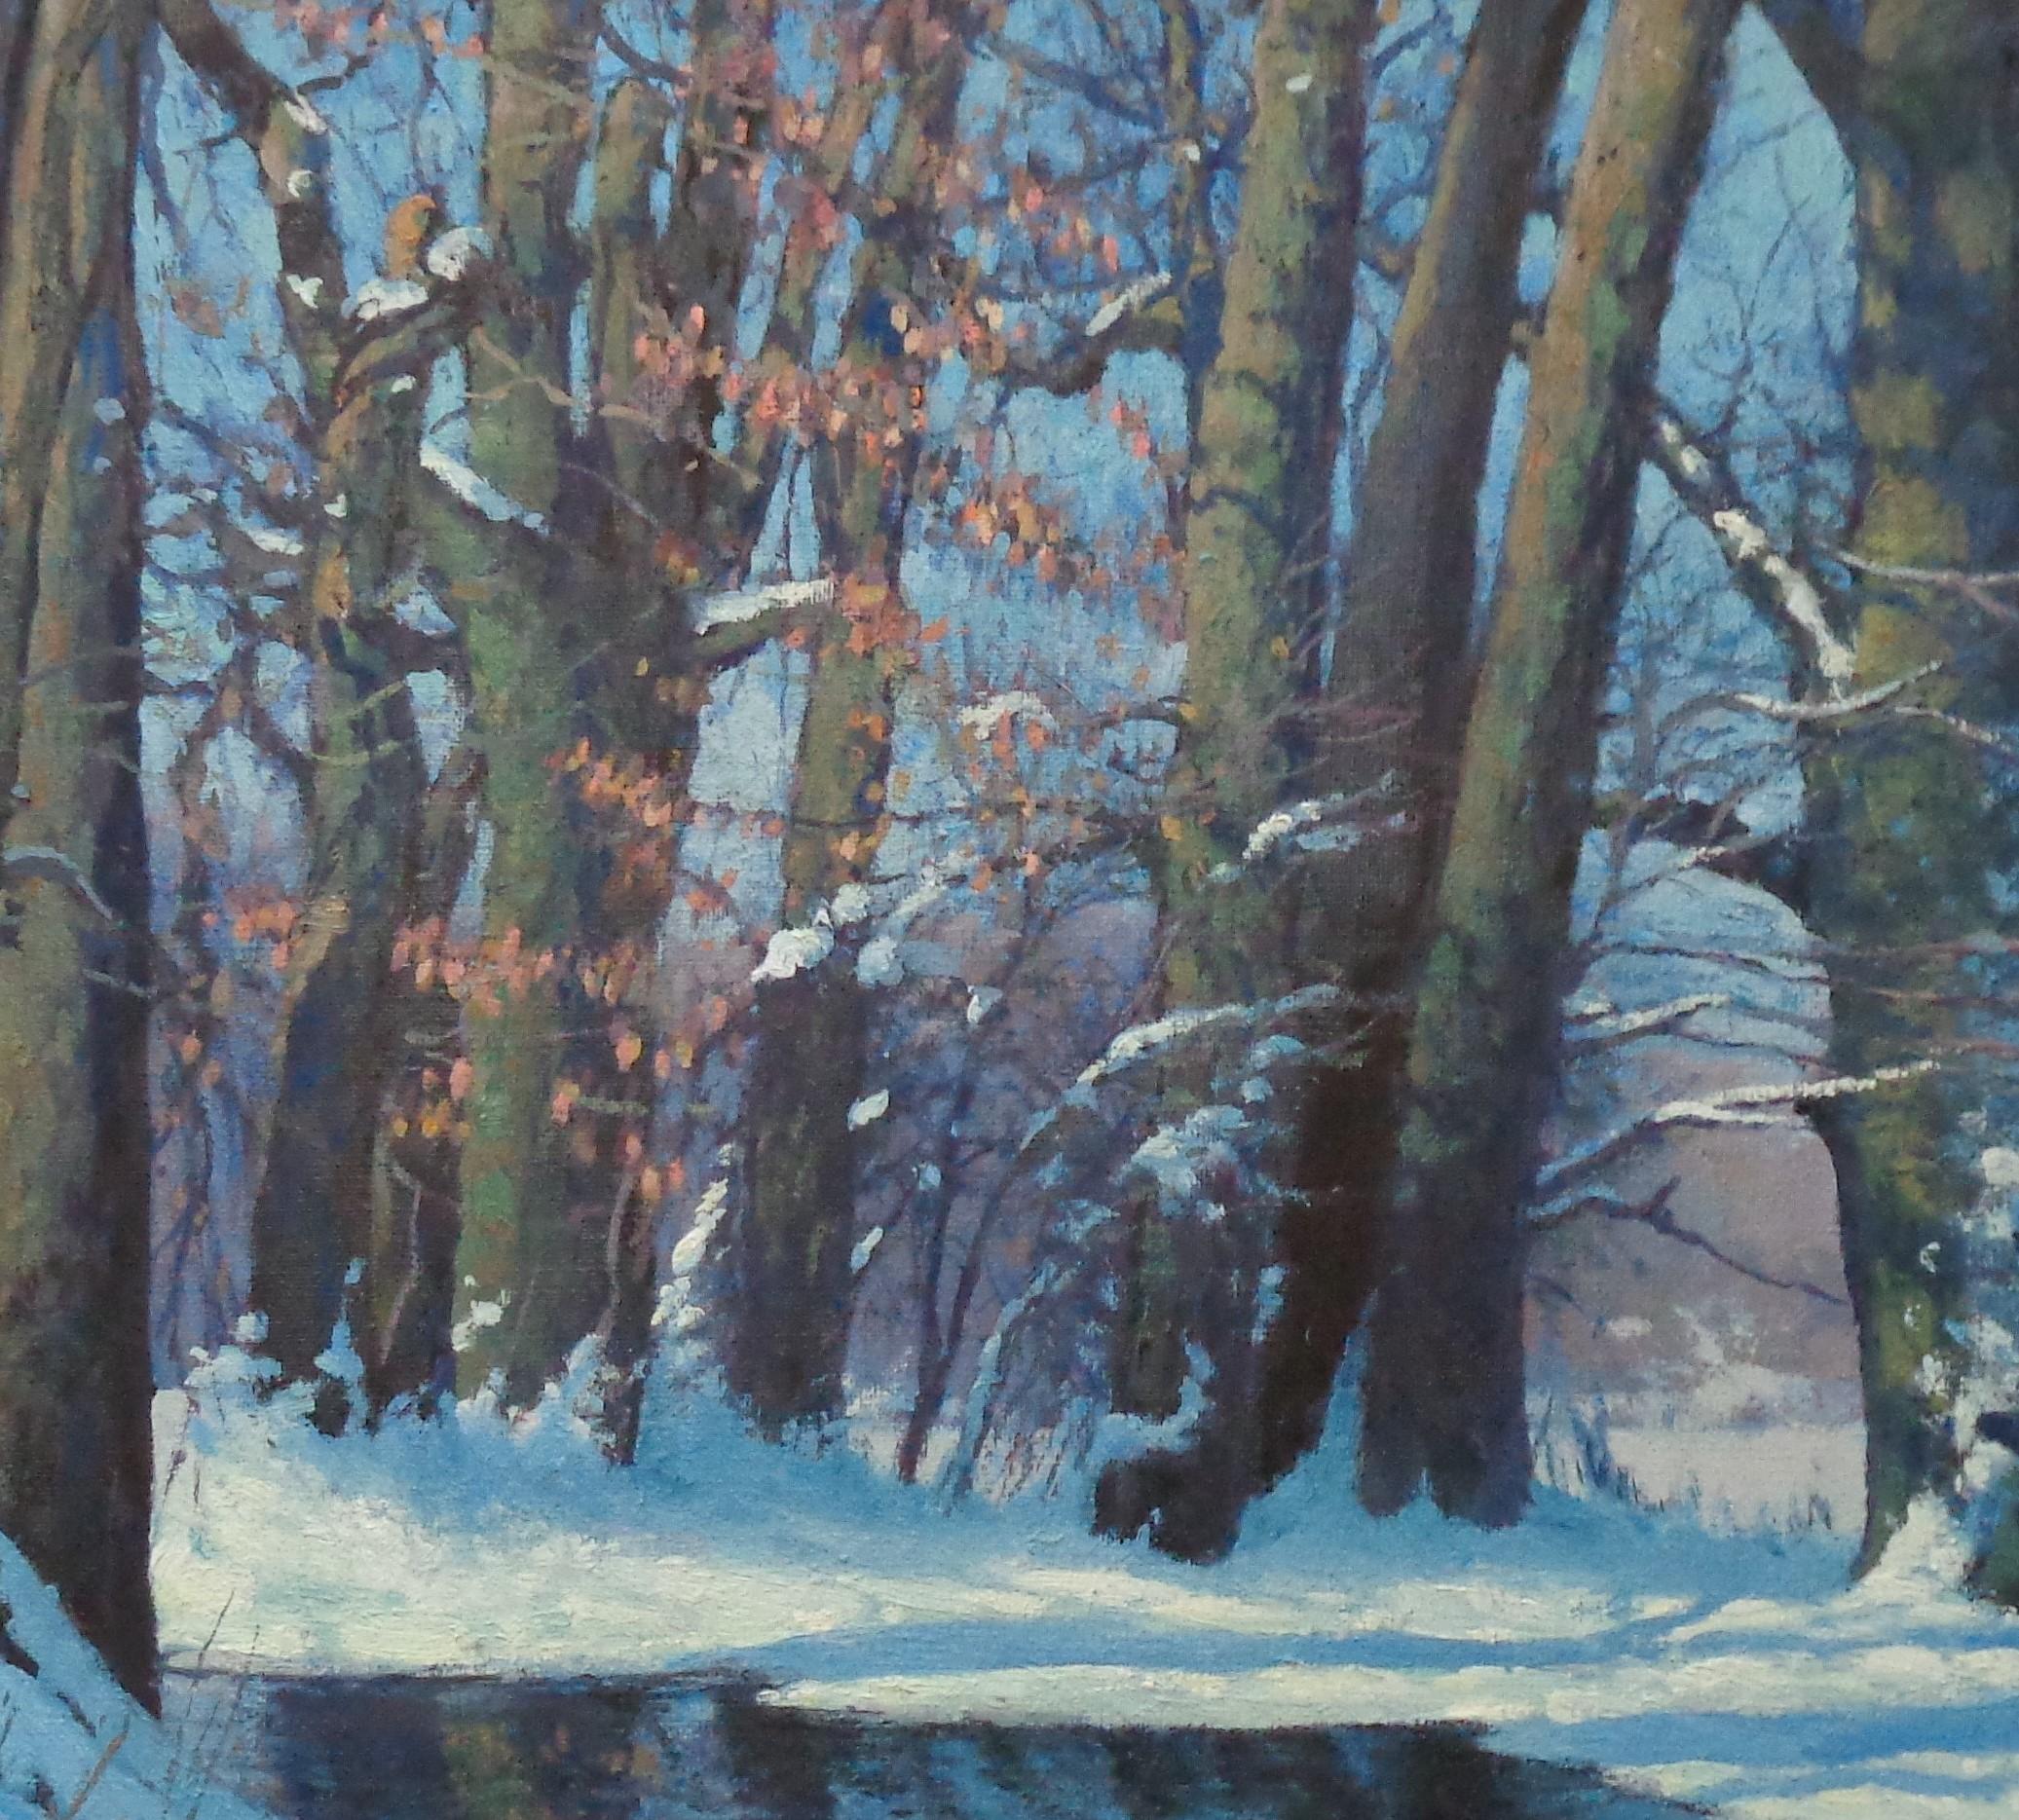  Winter Snow Scene Contemporary Landscape Oil Painting by Michael Budden For Sale 6